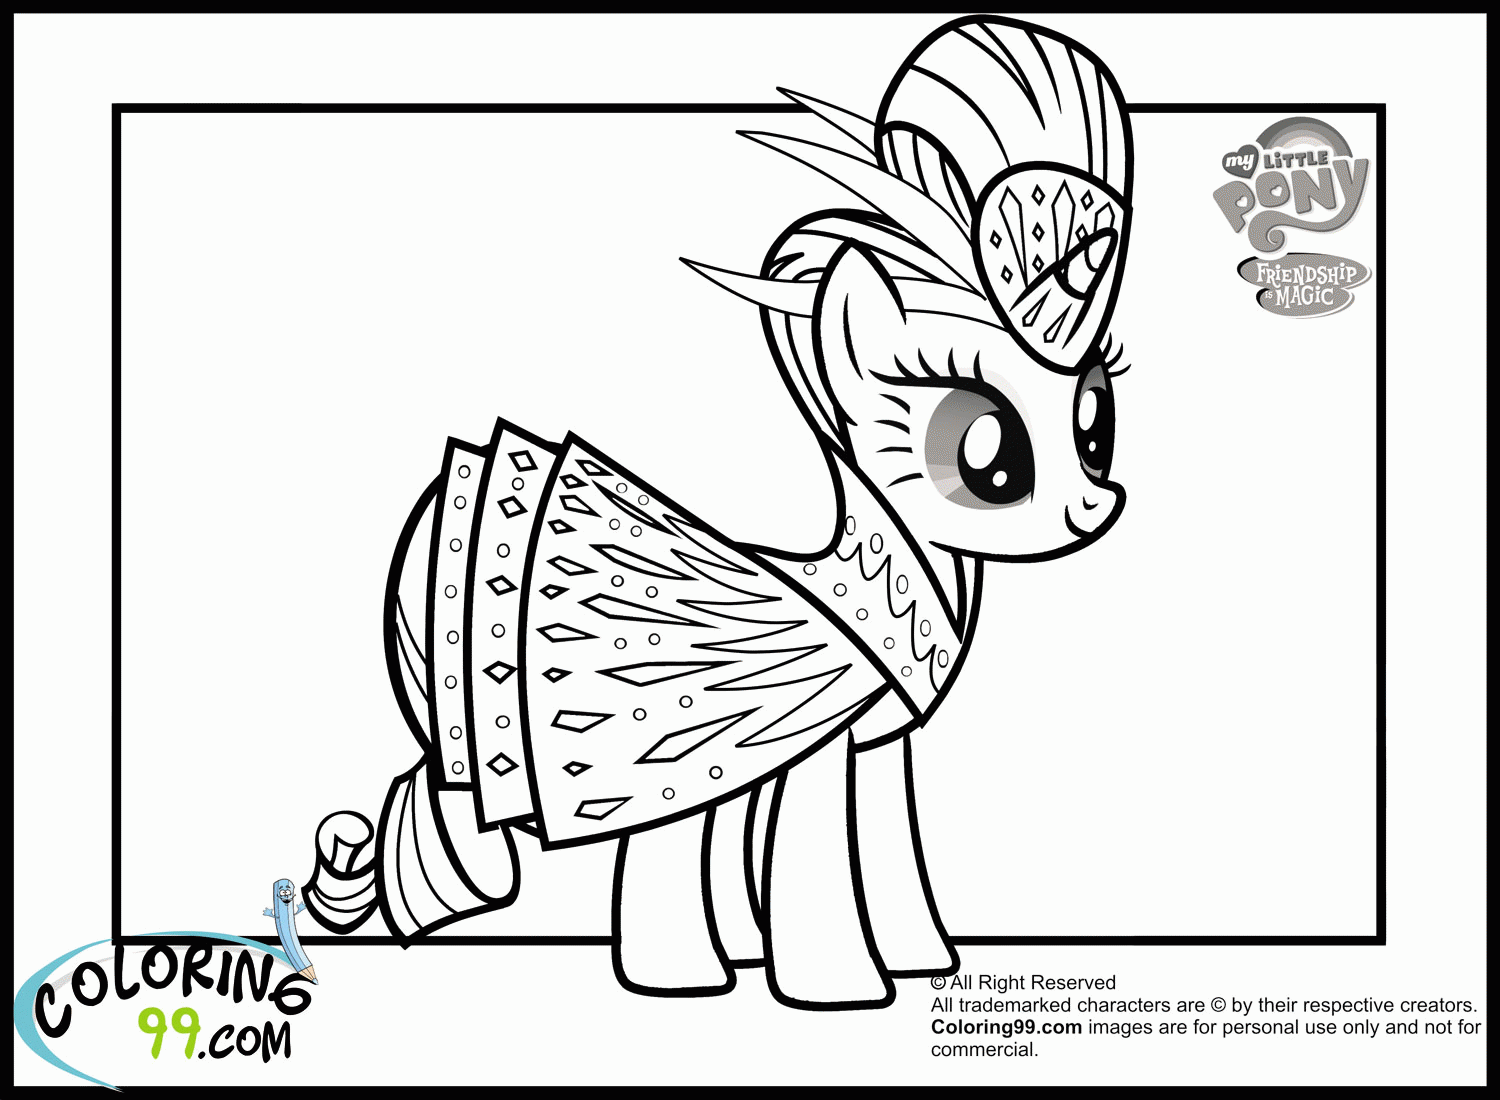 At The Gala My Little Pony Coloring Pages - Coloring Pages For All ...